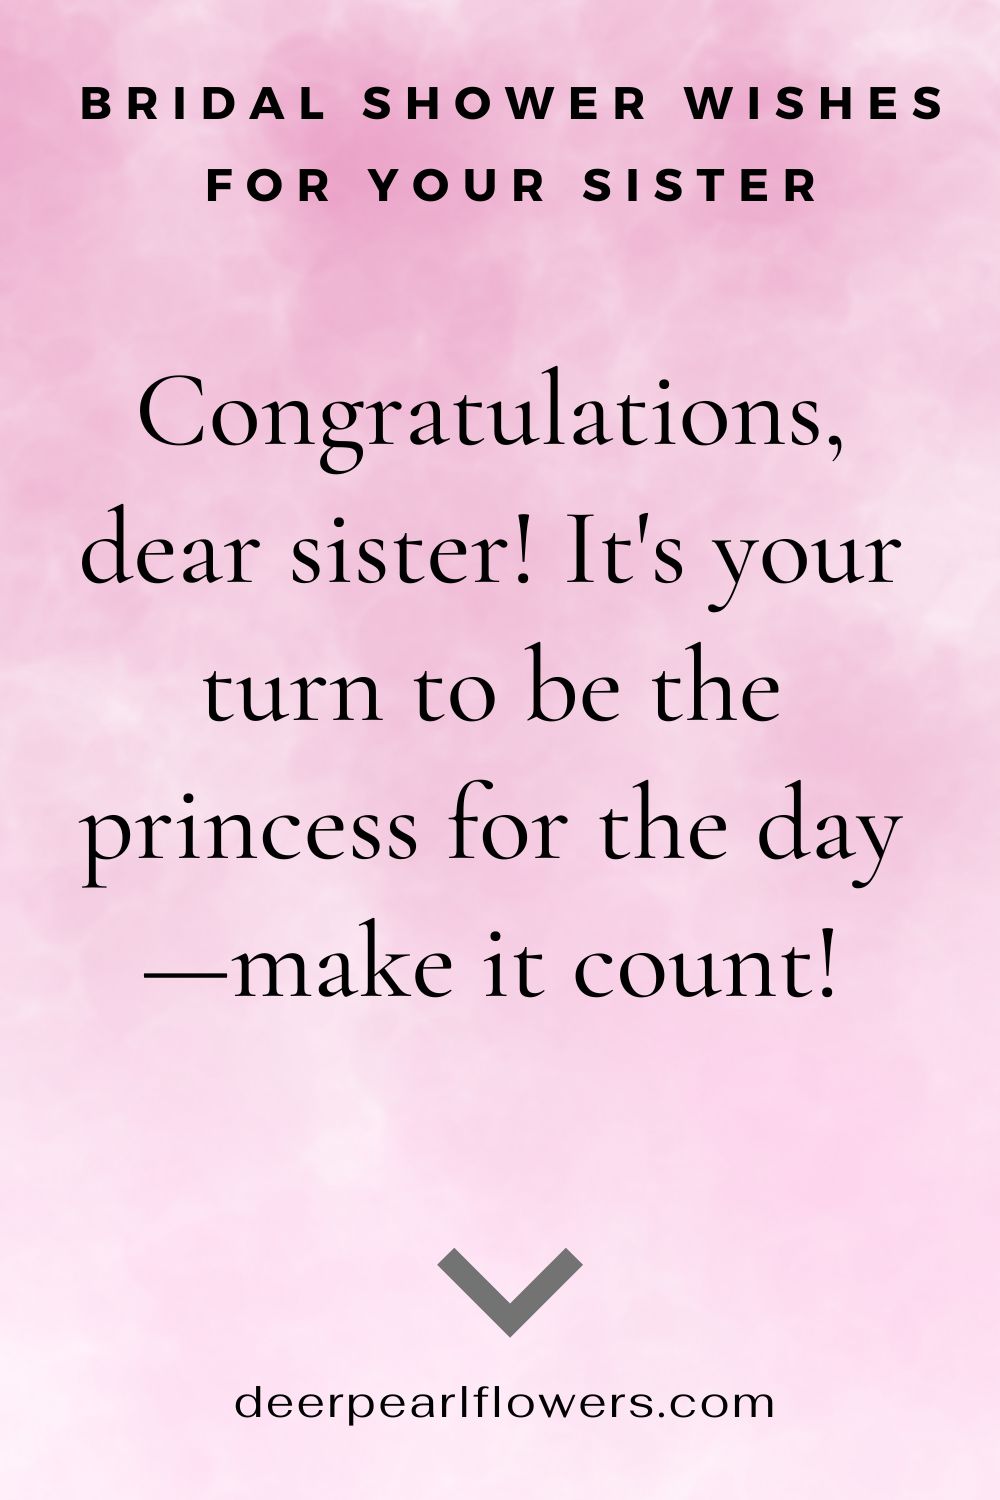 Bridal Shower Wishes for Your Sister